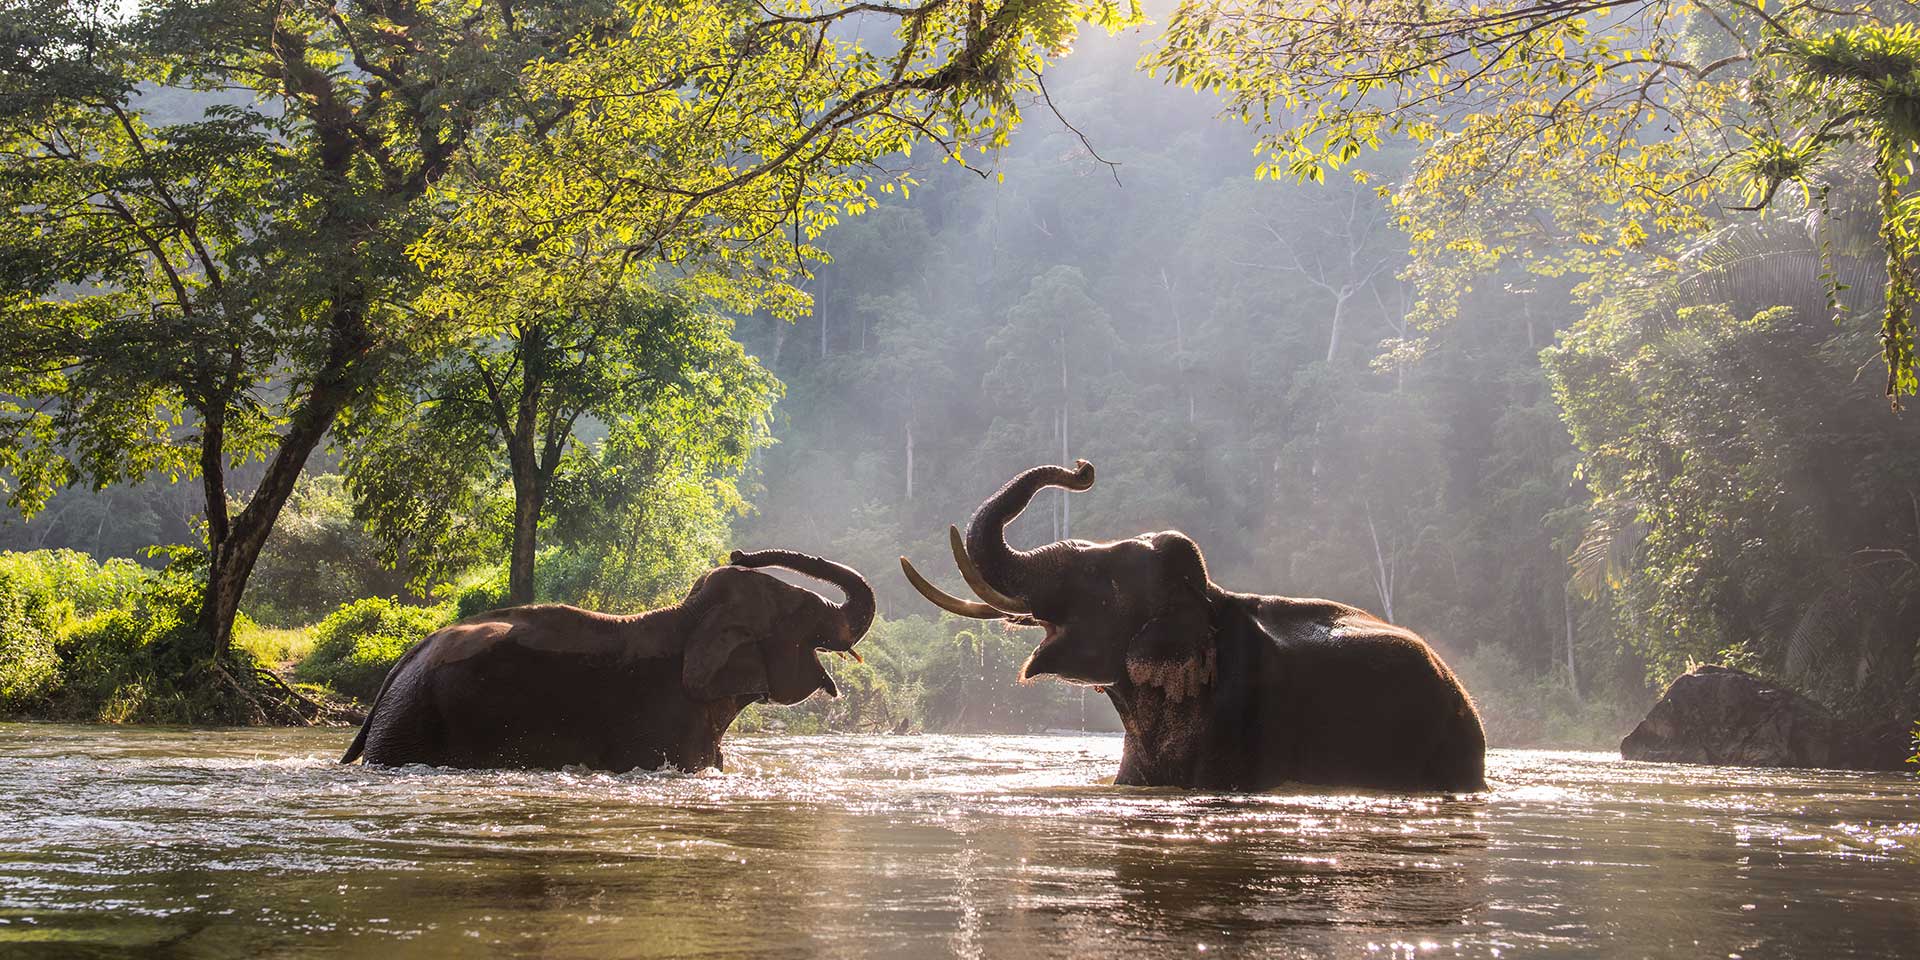 elephants playing in water